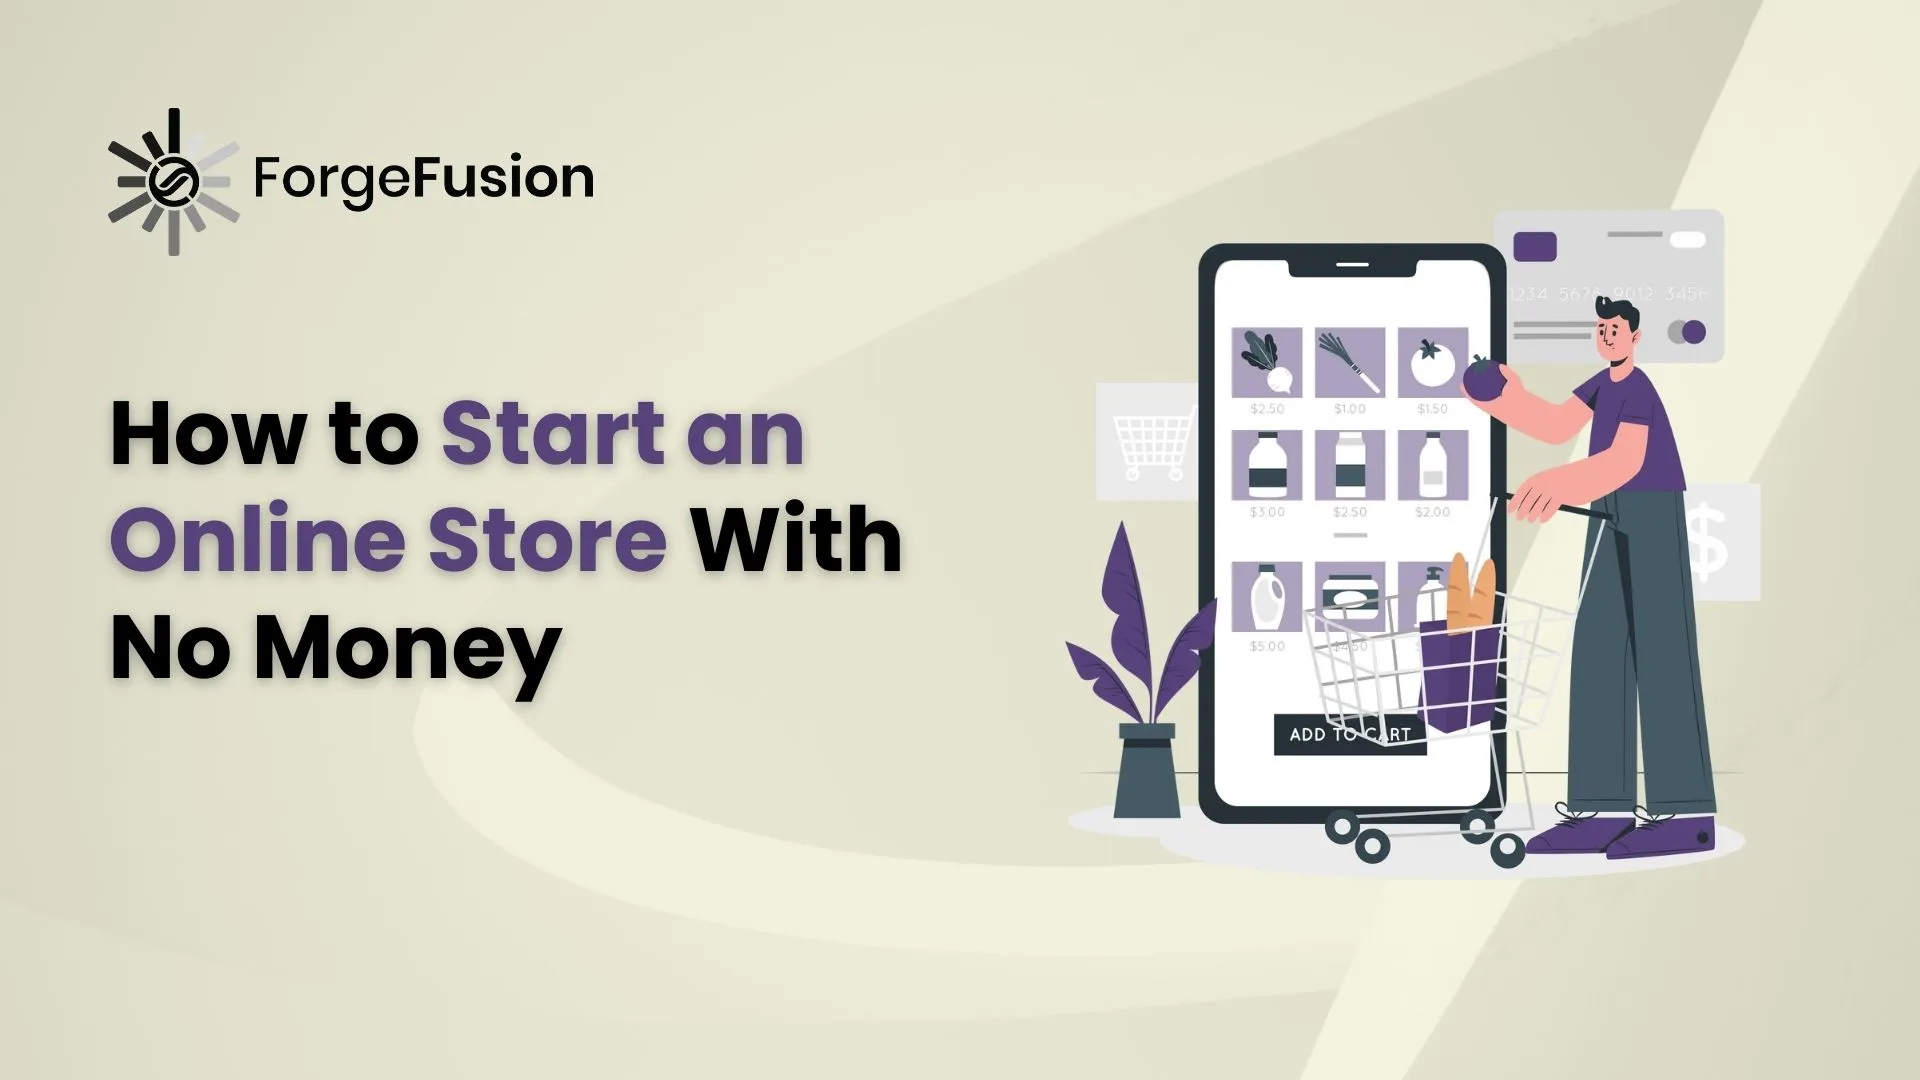 Start an Online Store With No Money